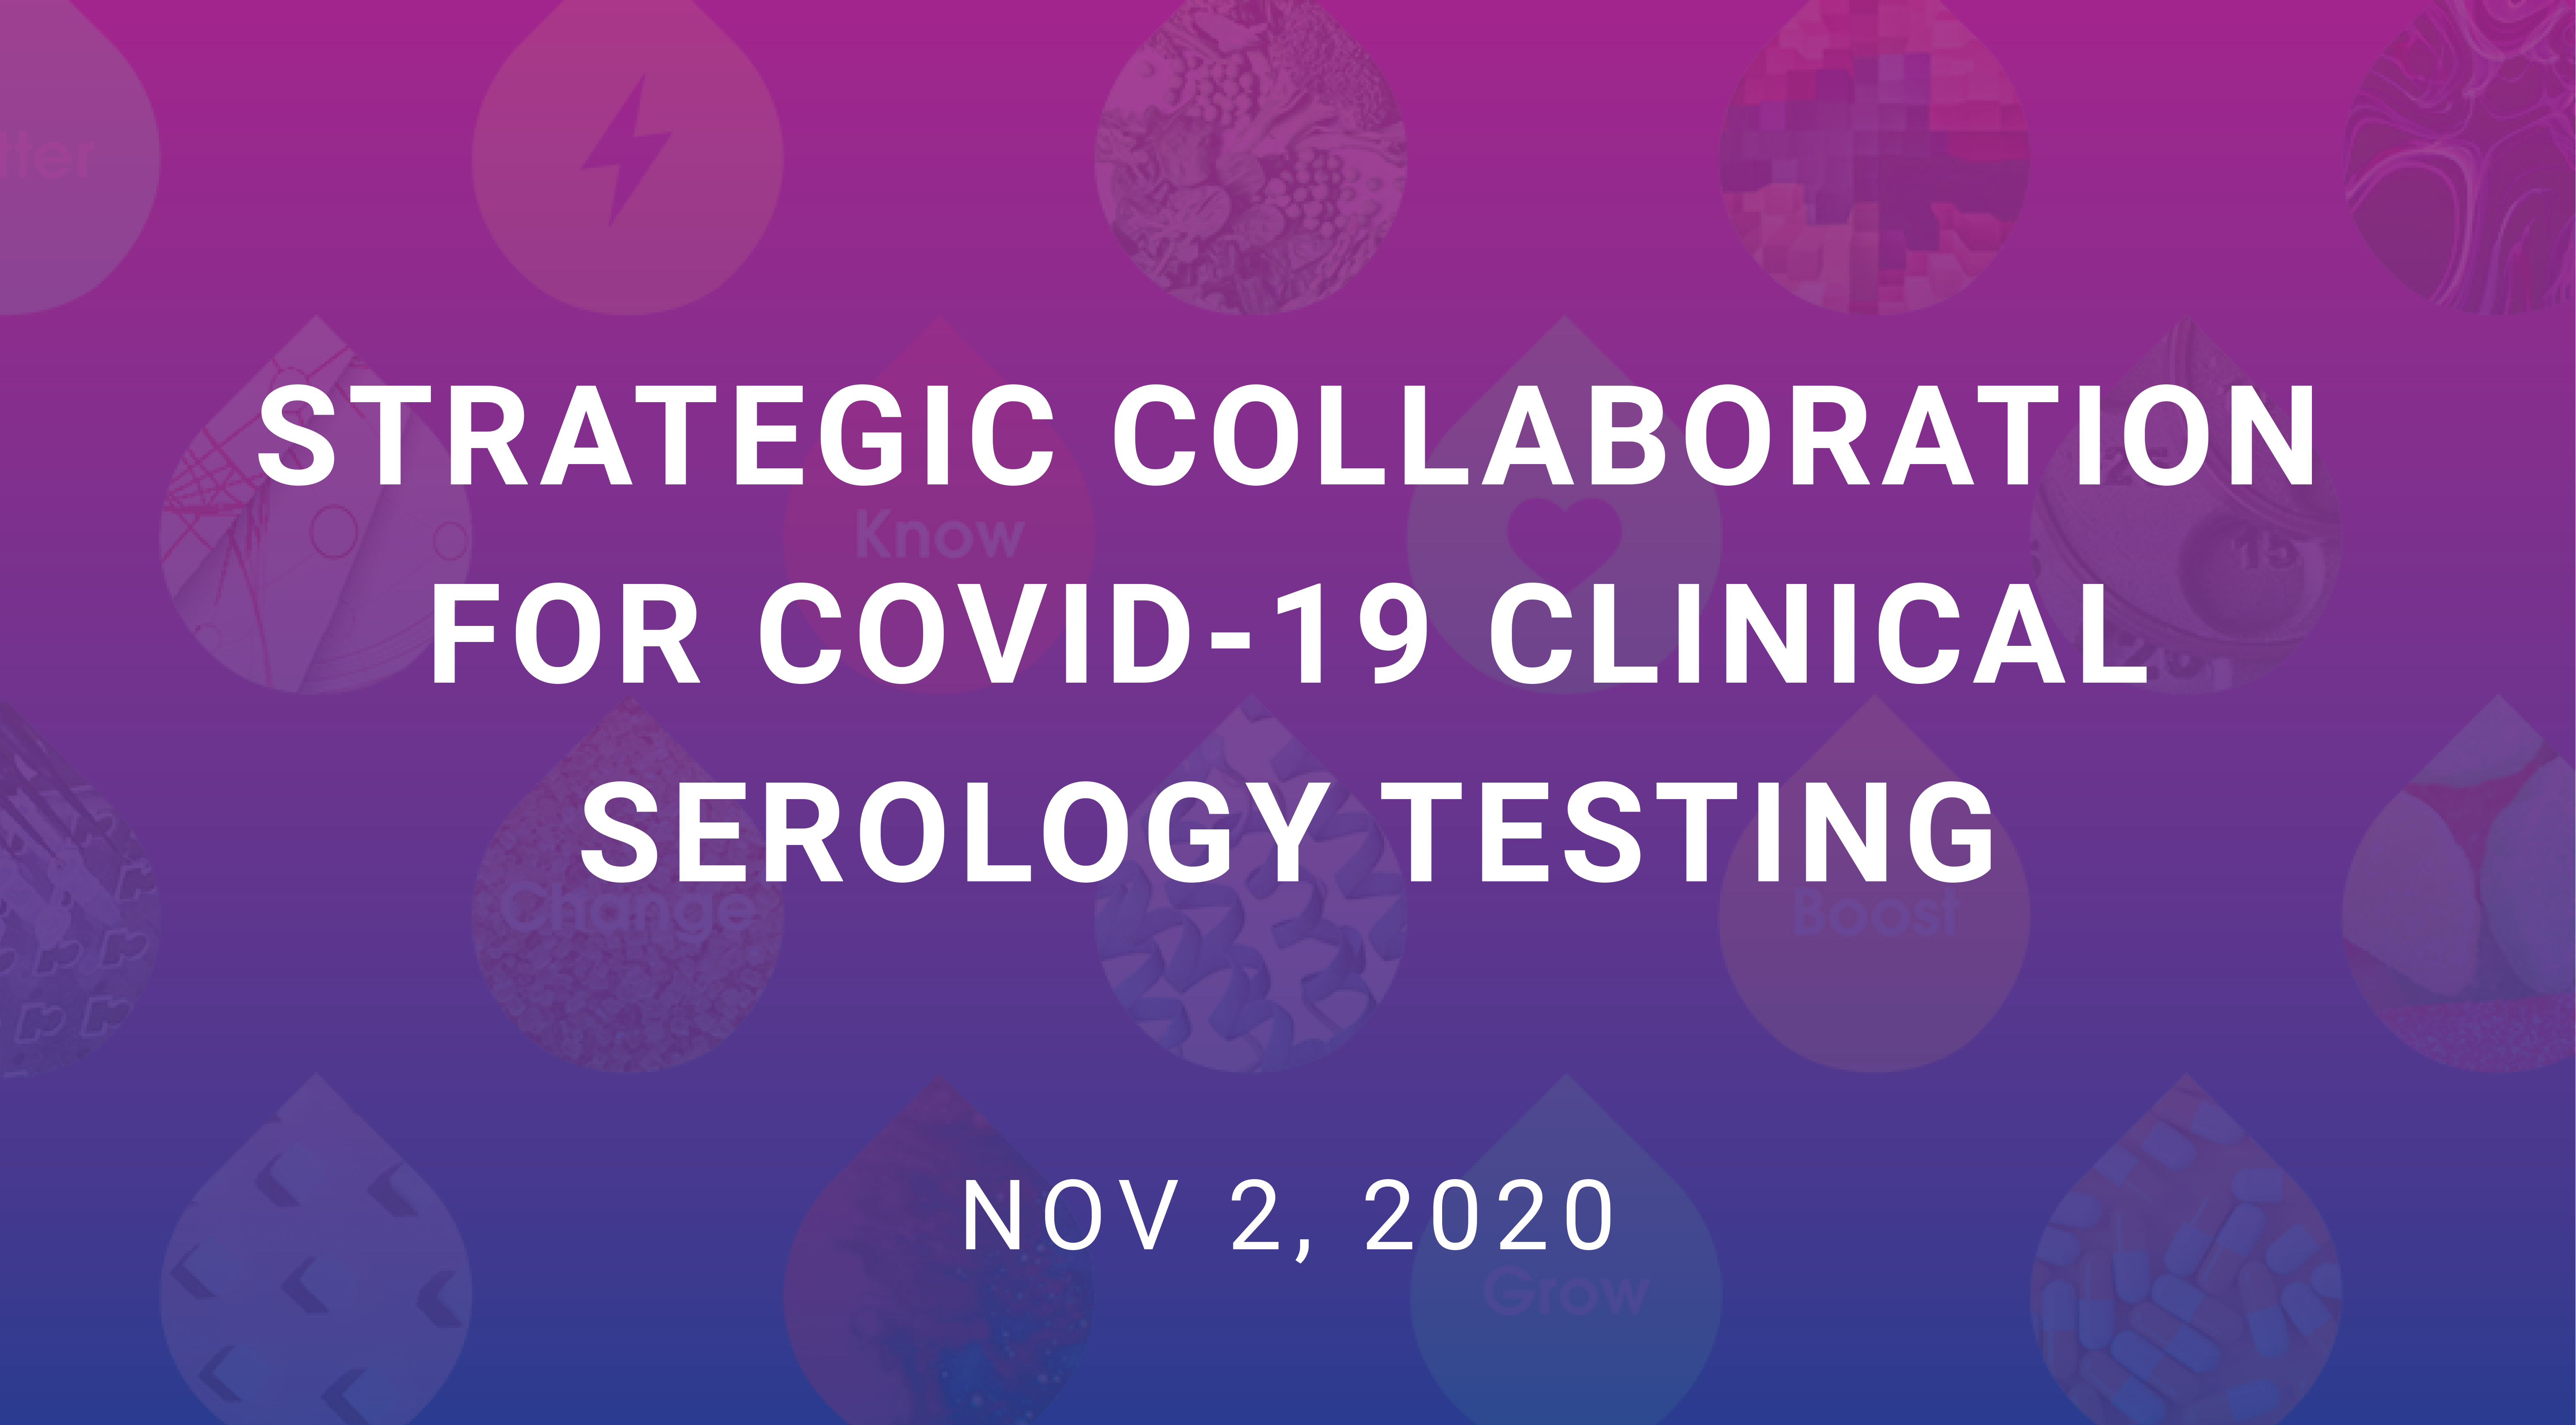 Parexel Announces Strategic Collaboration with Synexa Life Sciences and Drawbridge Health for COVID-19 Clinical Serology Testing Solution 1